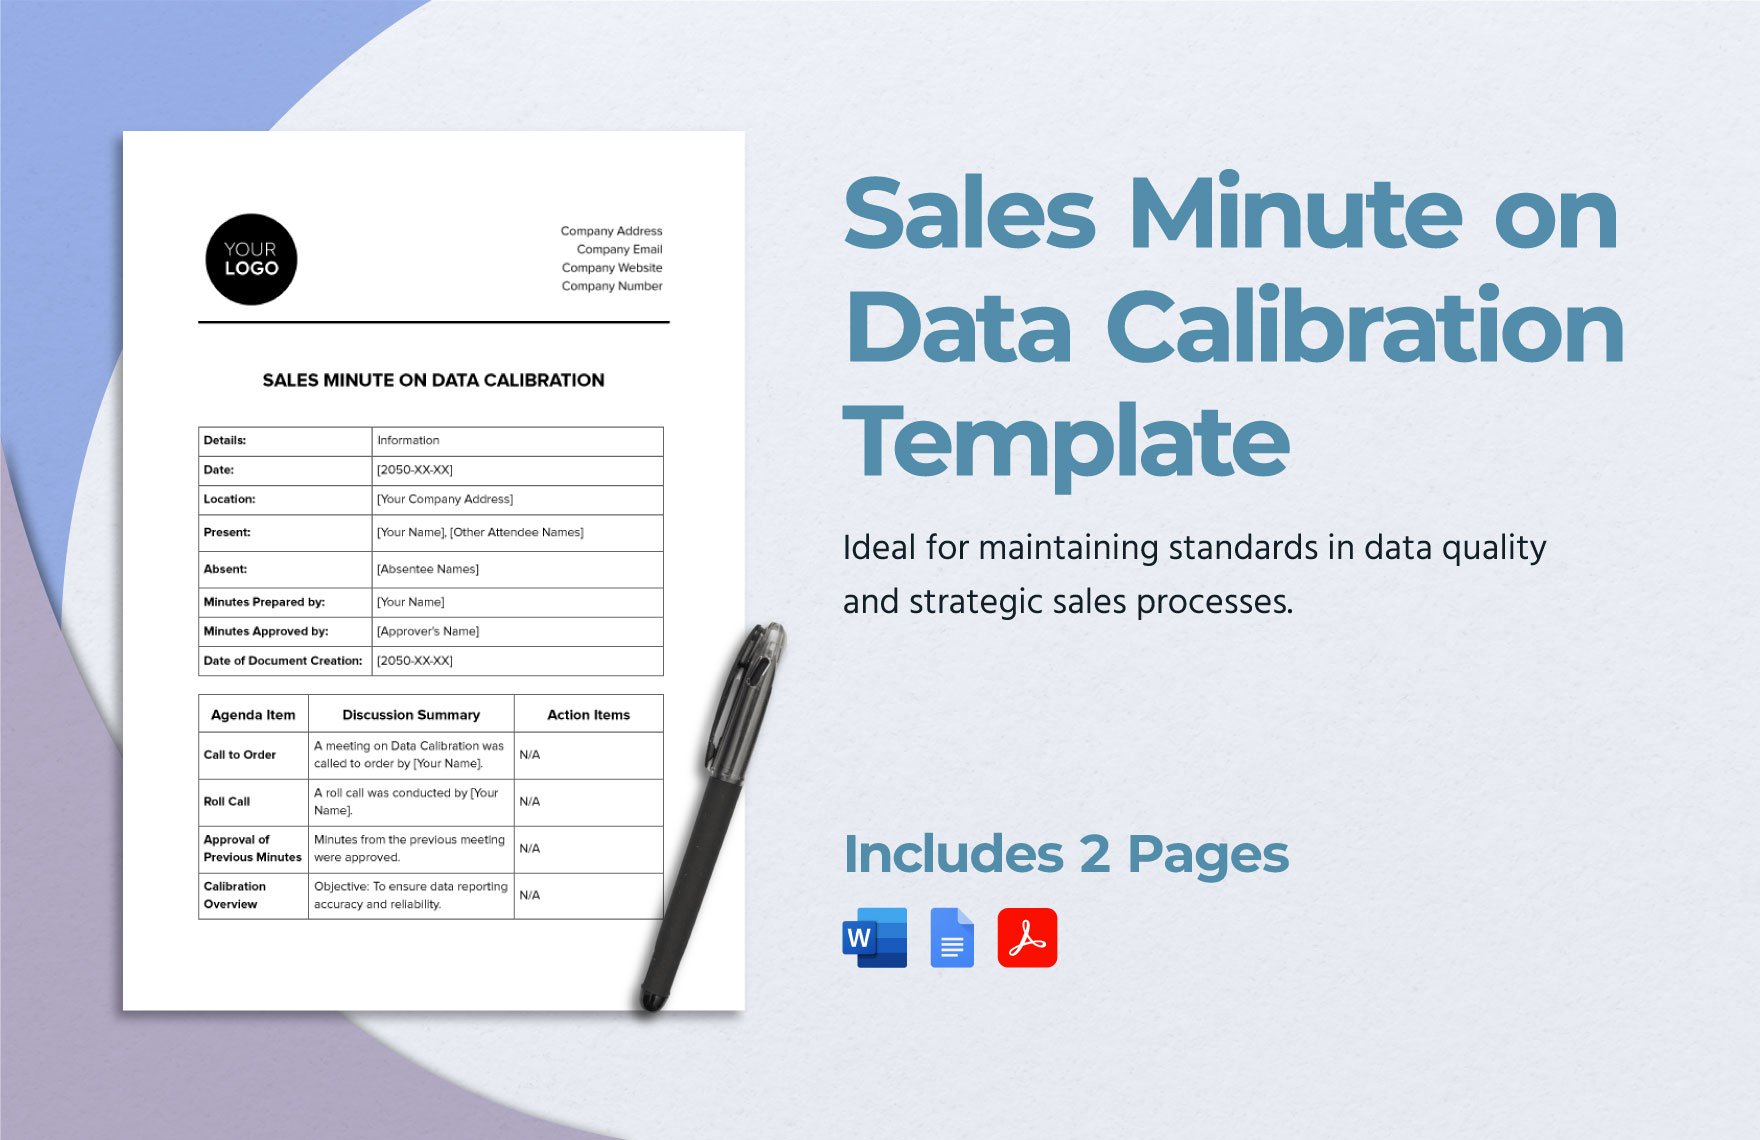 Sales Minute on Data Calibration Template